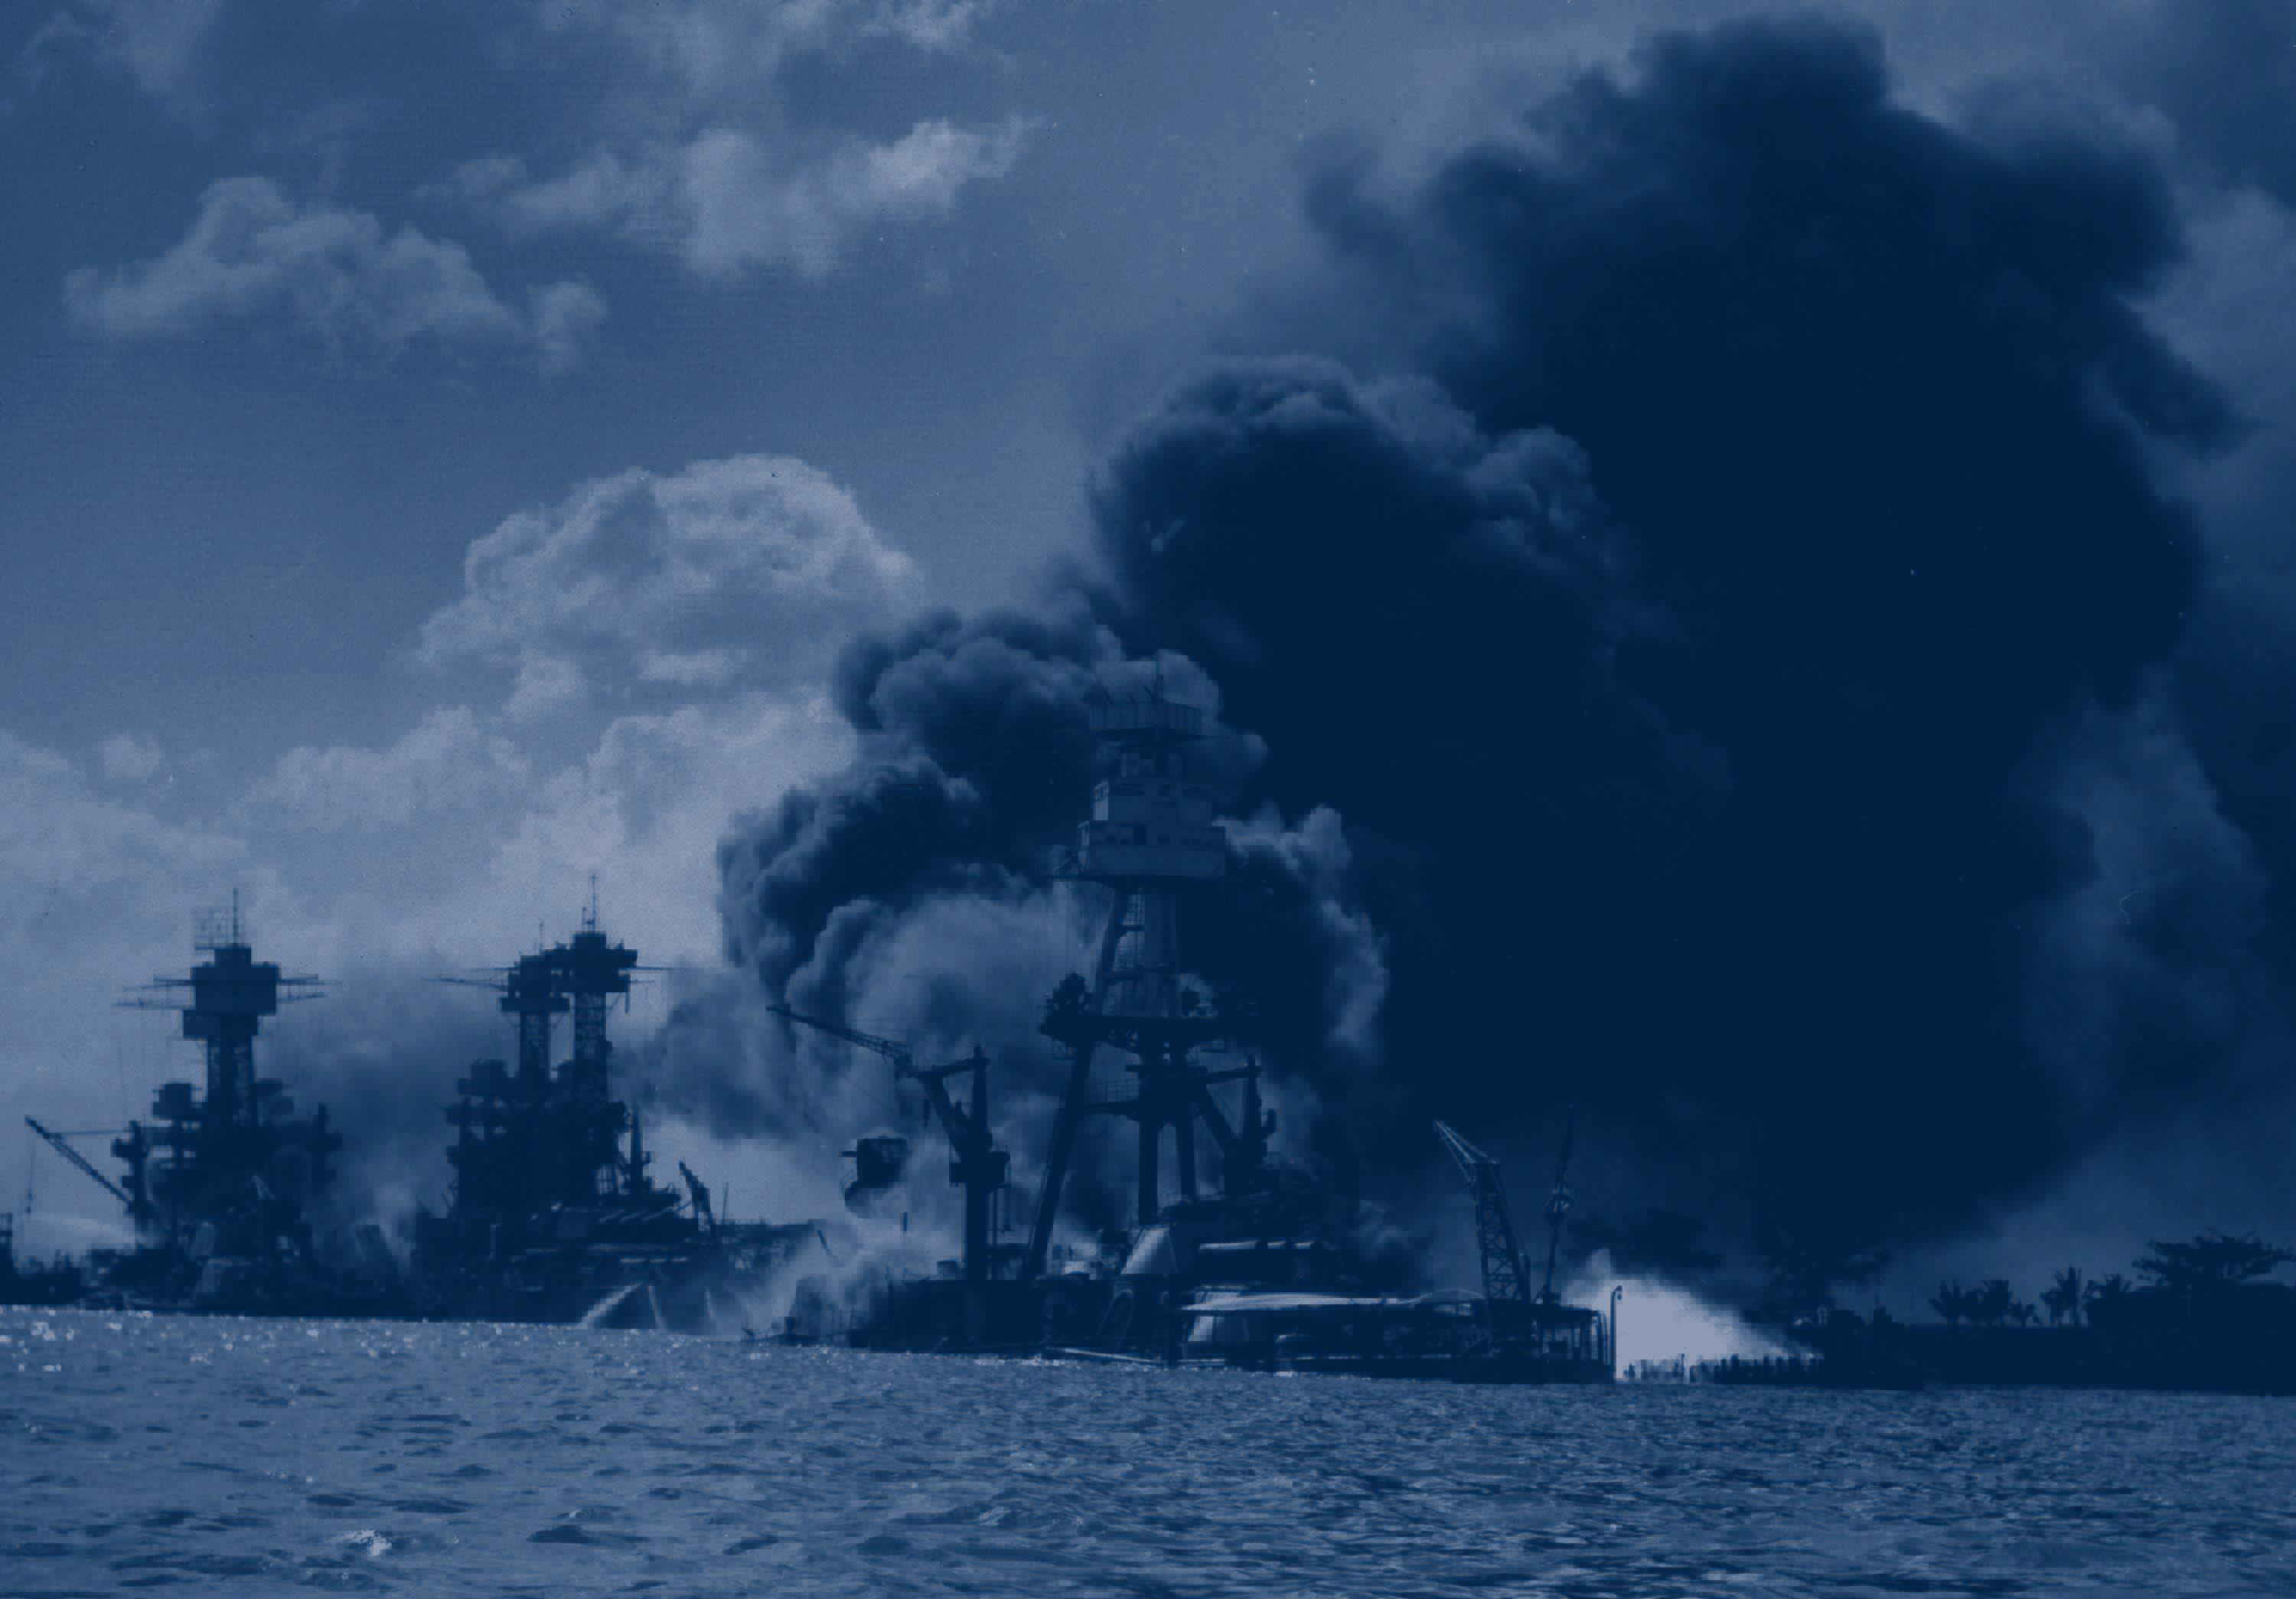 World War II battle at sea image with several ships afire